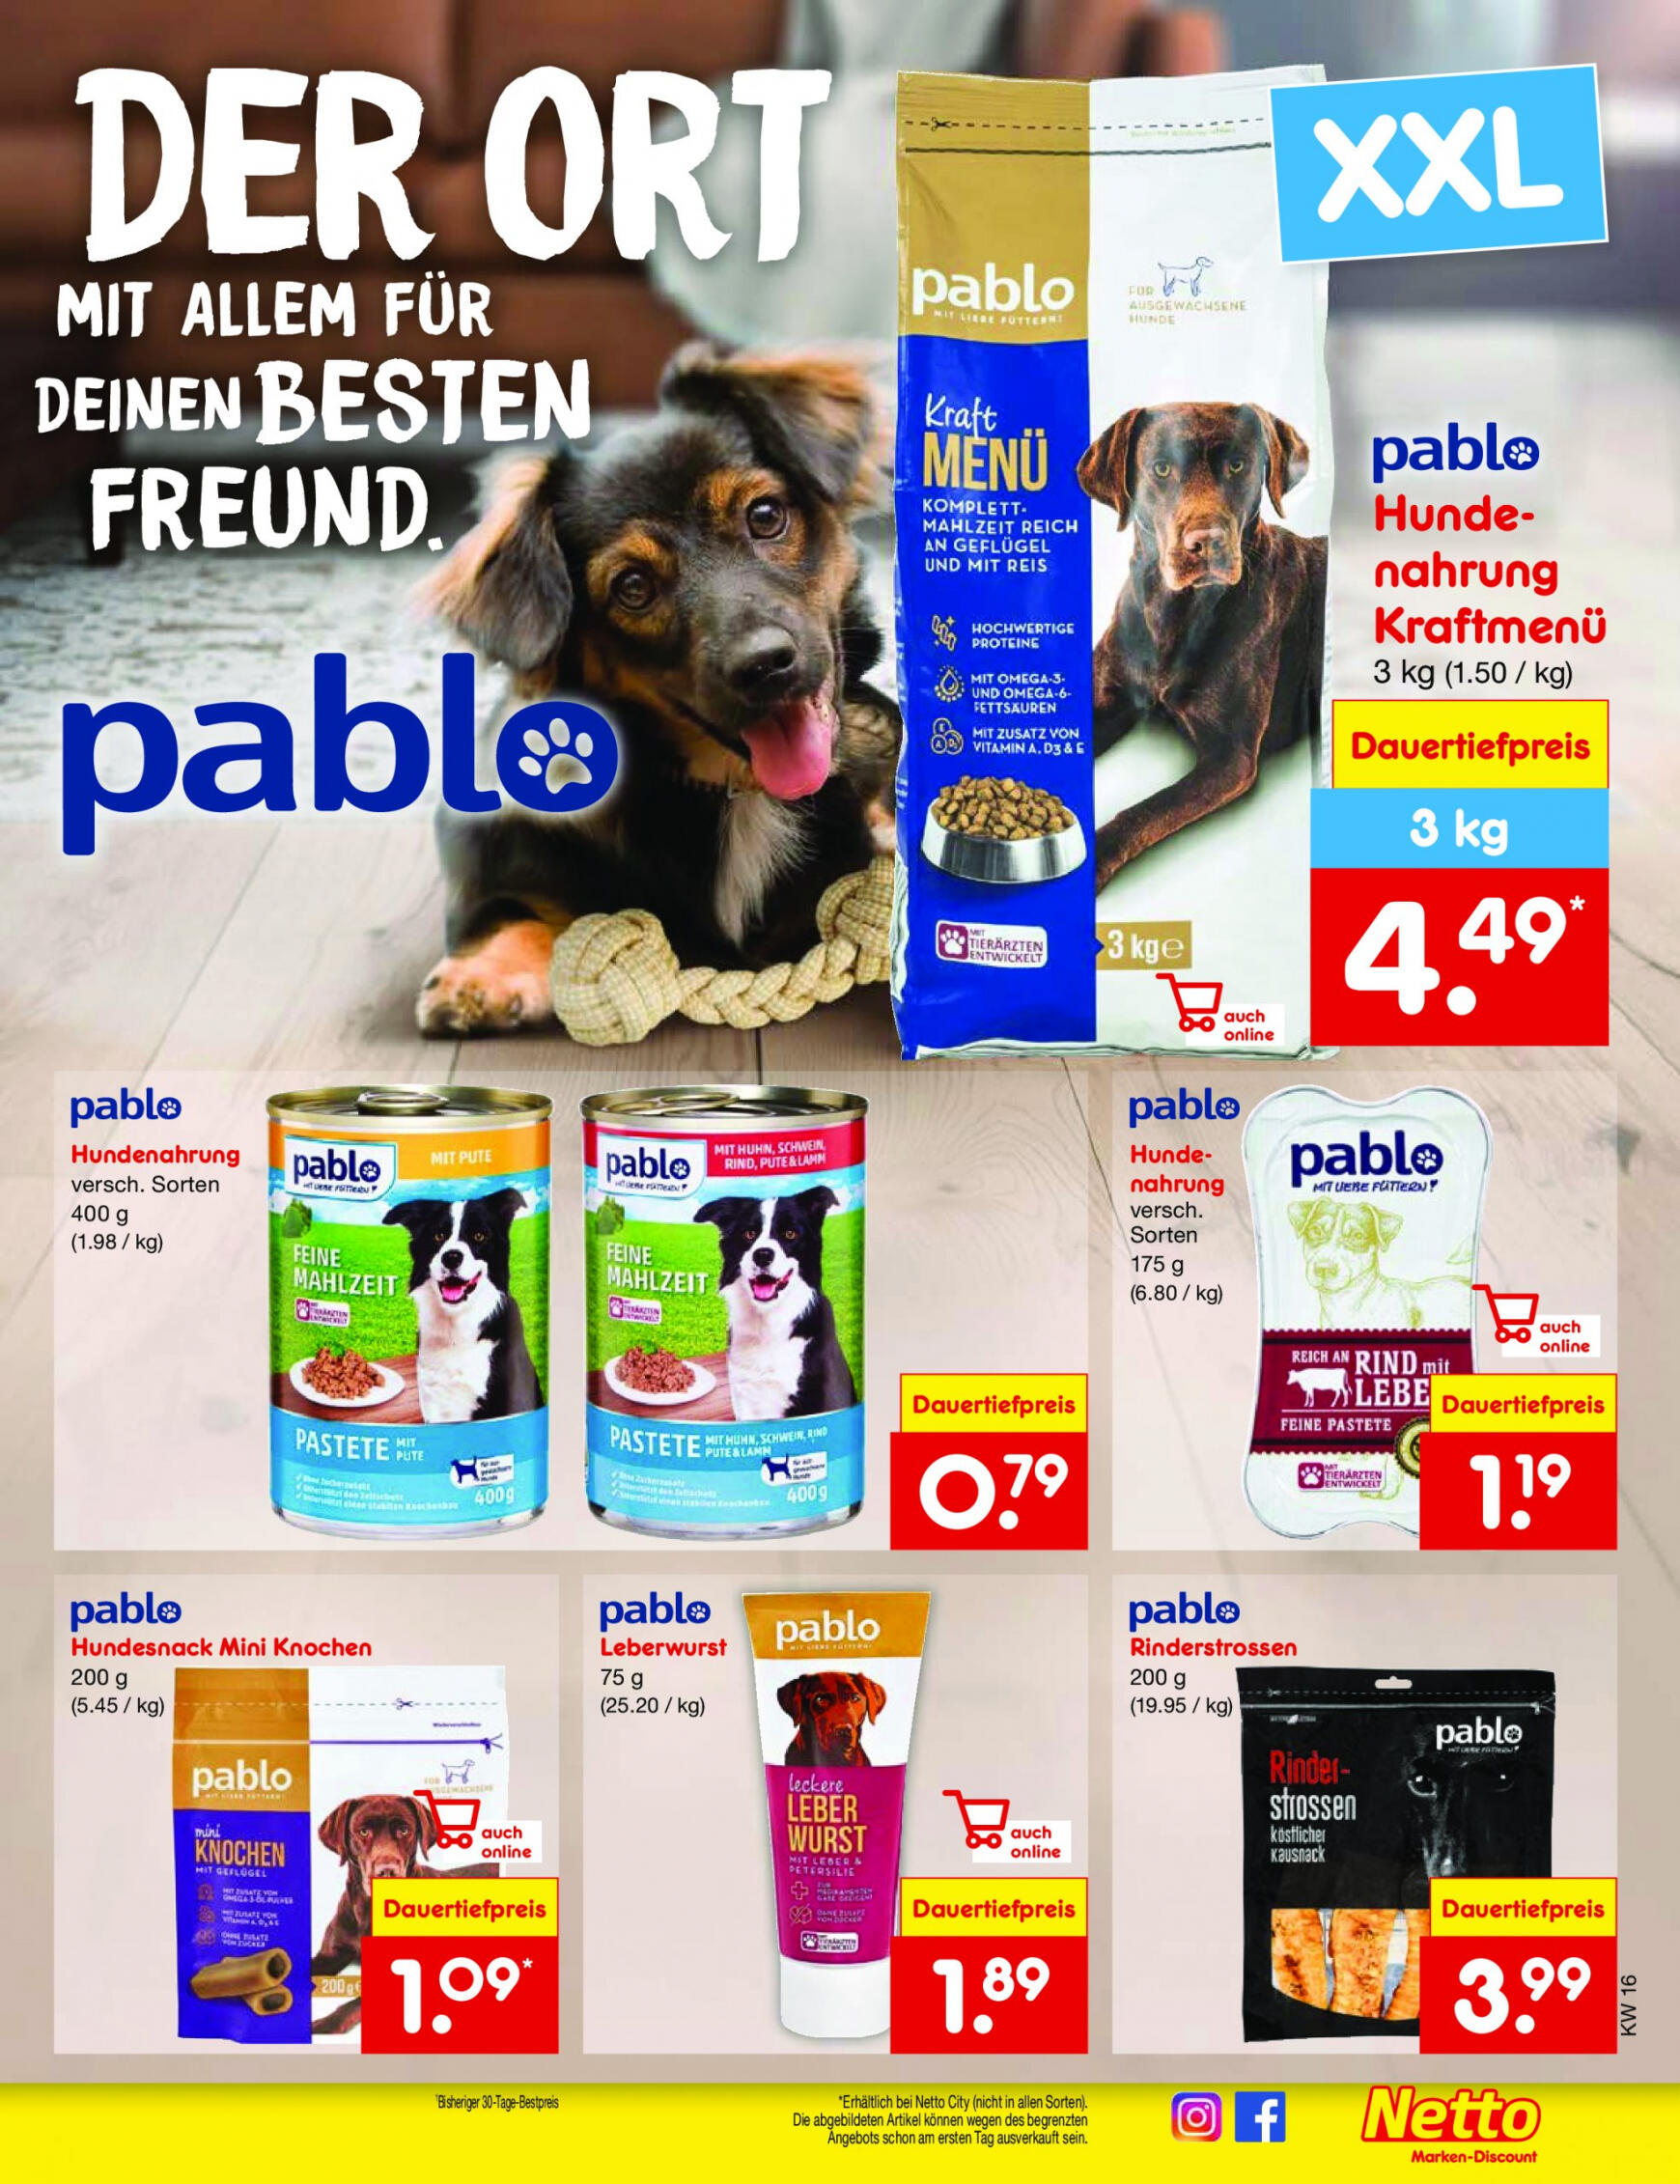 netto - Flyer Netto aktuell 15.04. - 20.04. - page: 48